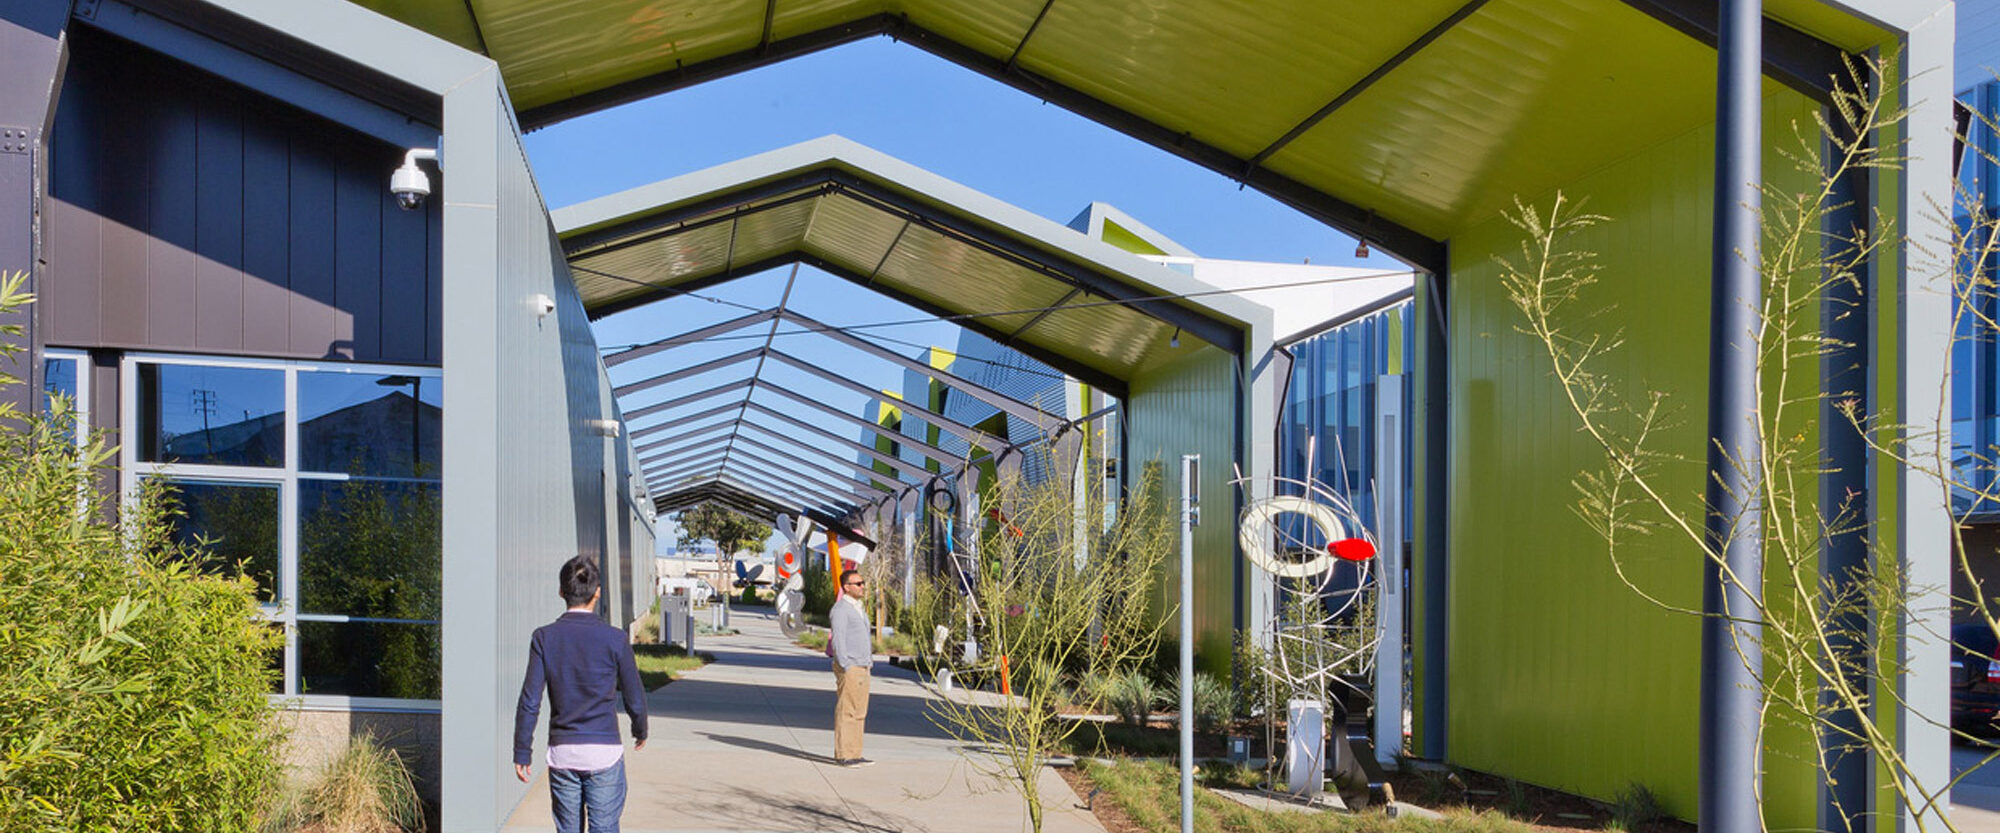 Modern commercial building with a striking green canopy stretching over the outdoor walkway, featuring geometric angles and contrasting blue sky, enhancing public space through architectural innovation.